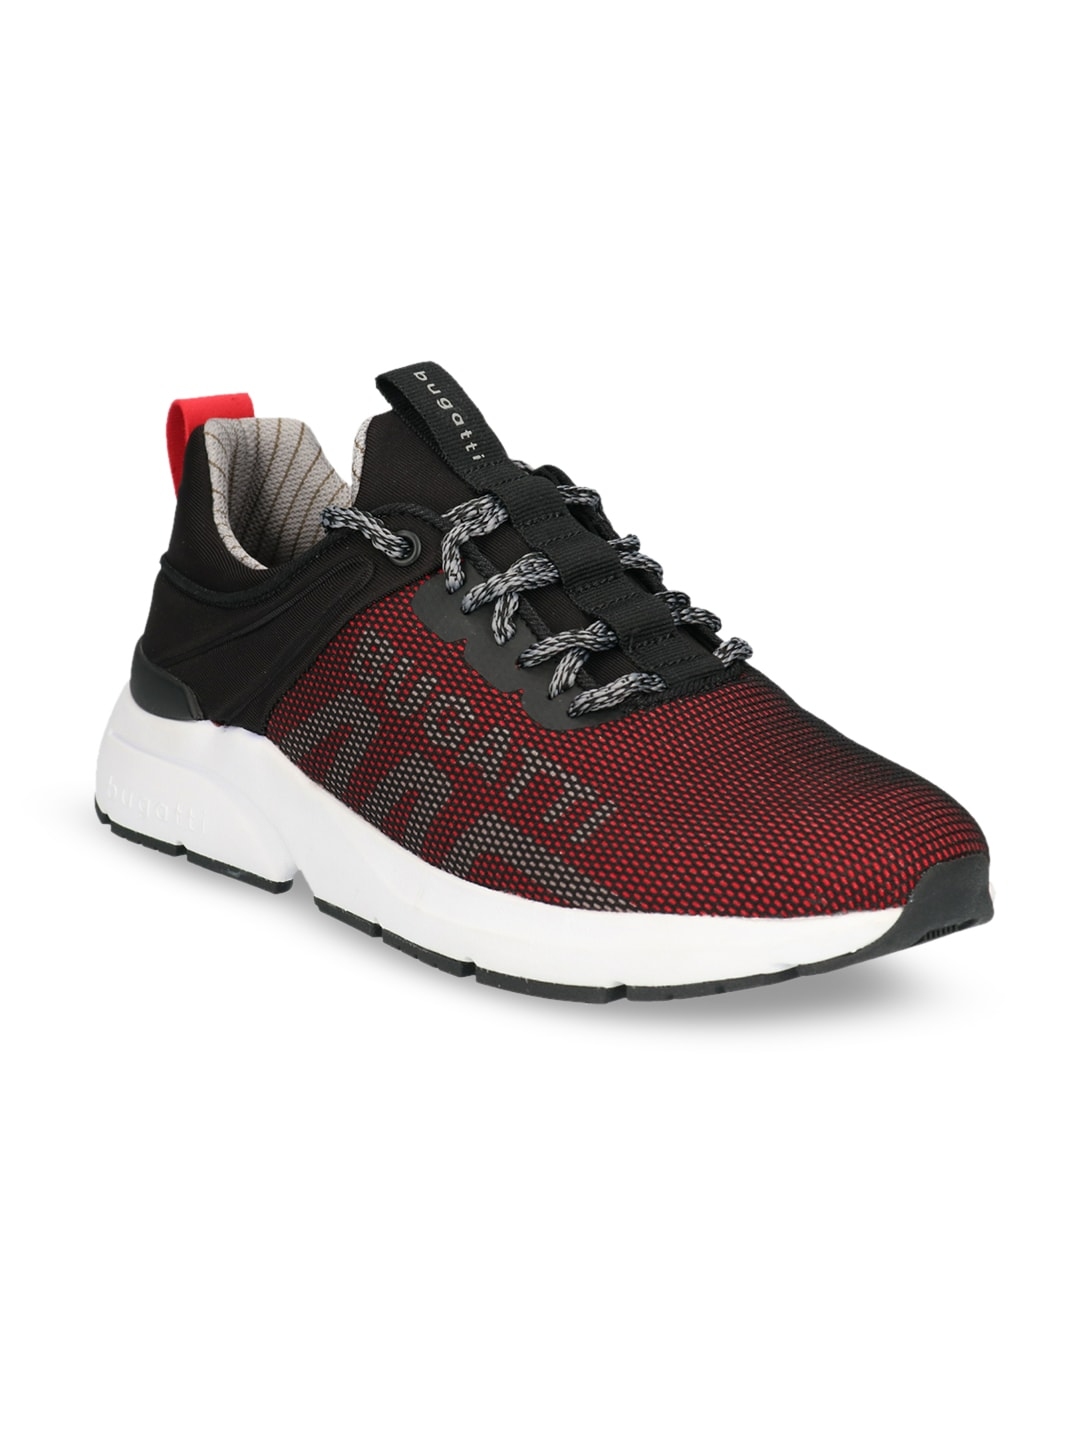 Buy Bugatti Men Black And Red Sneakers Casual Shoes For Men 10503650 Myntra 7195